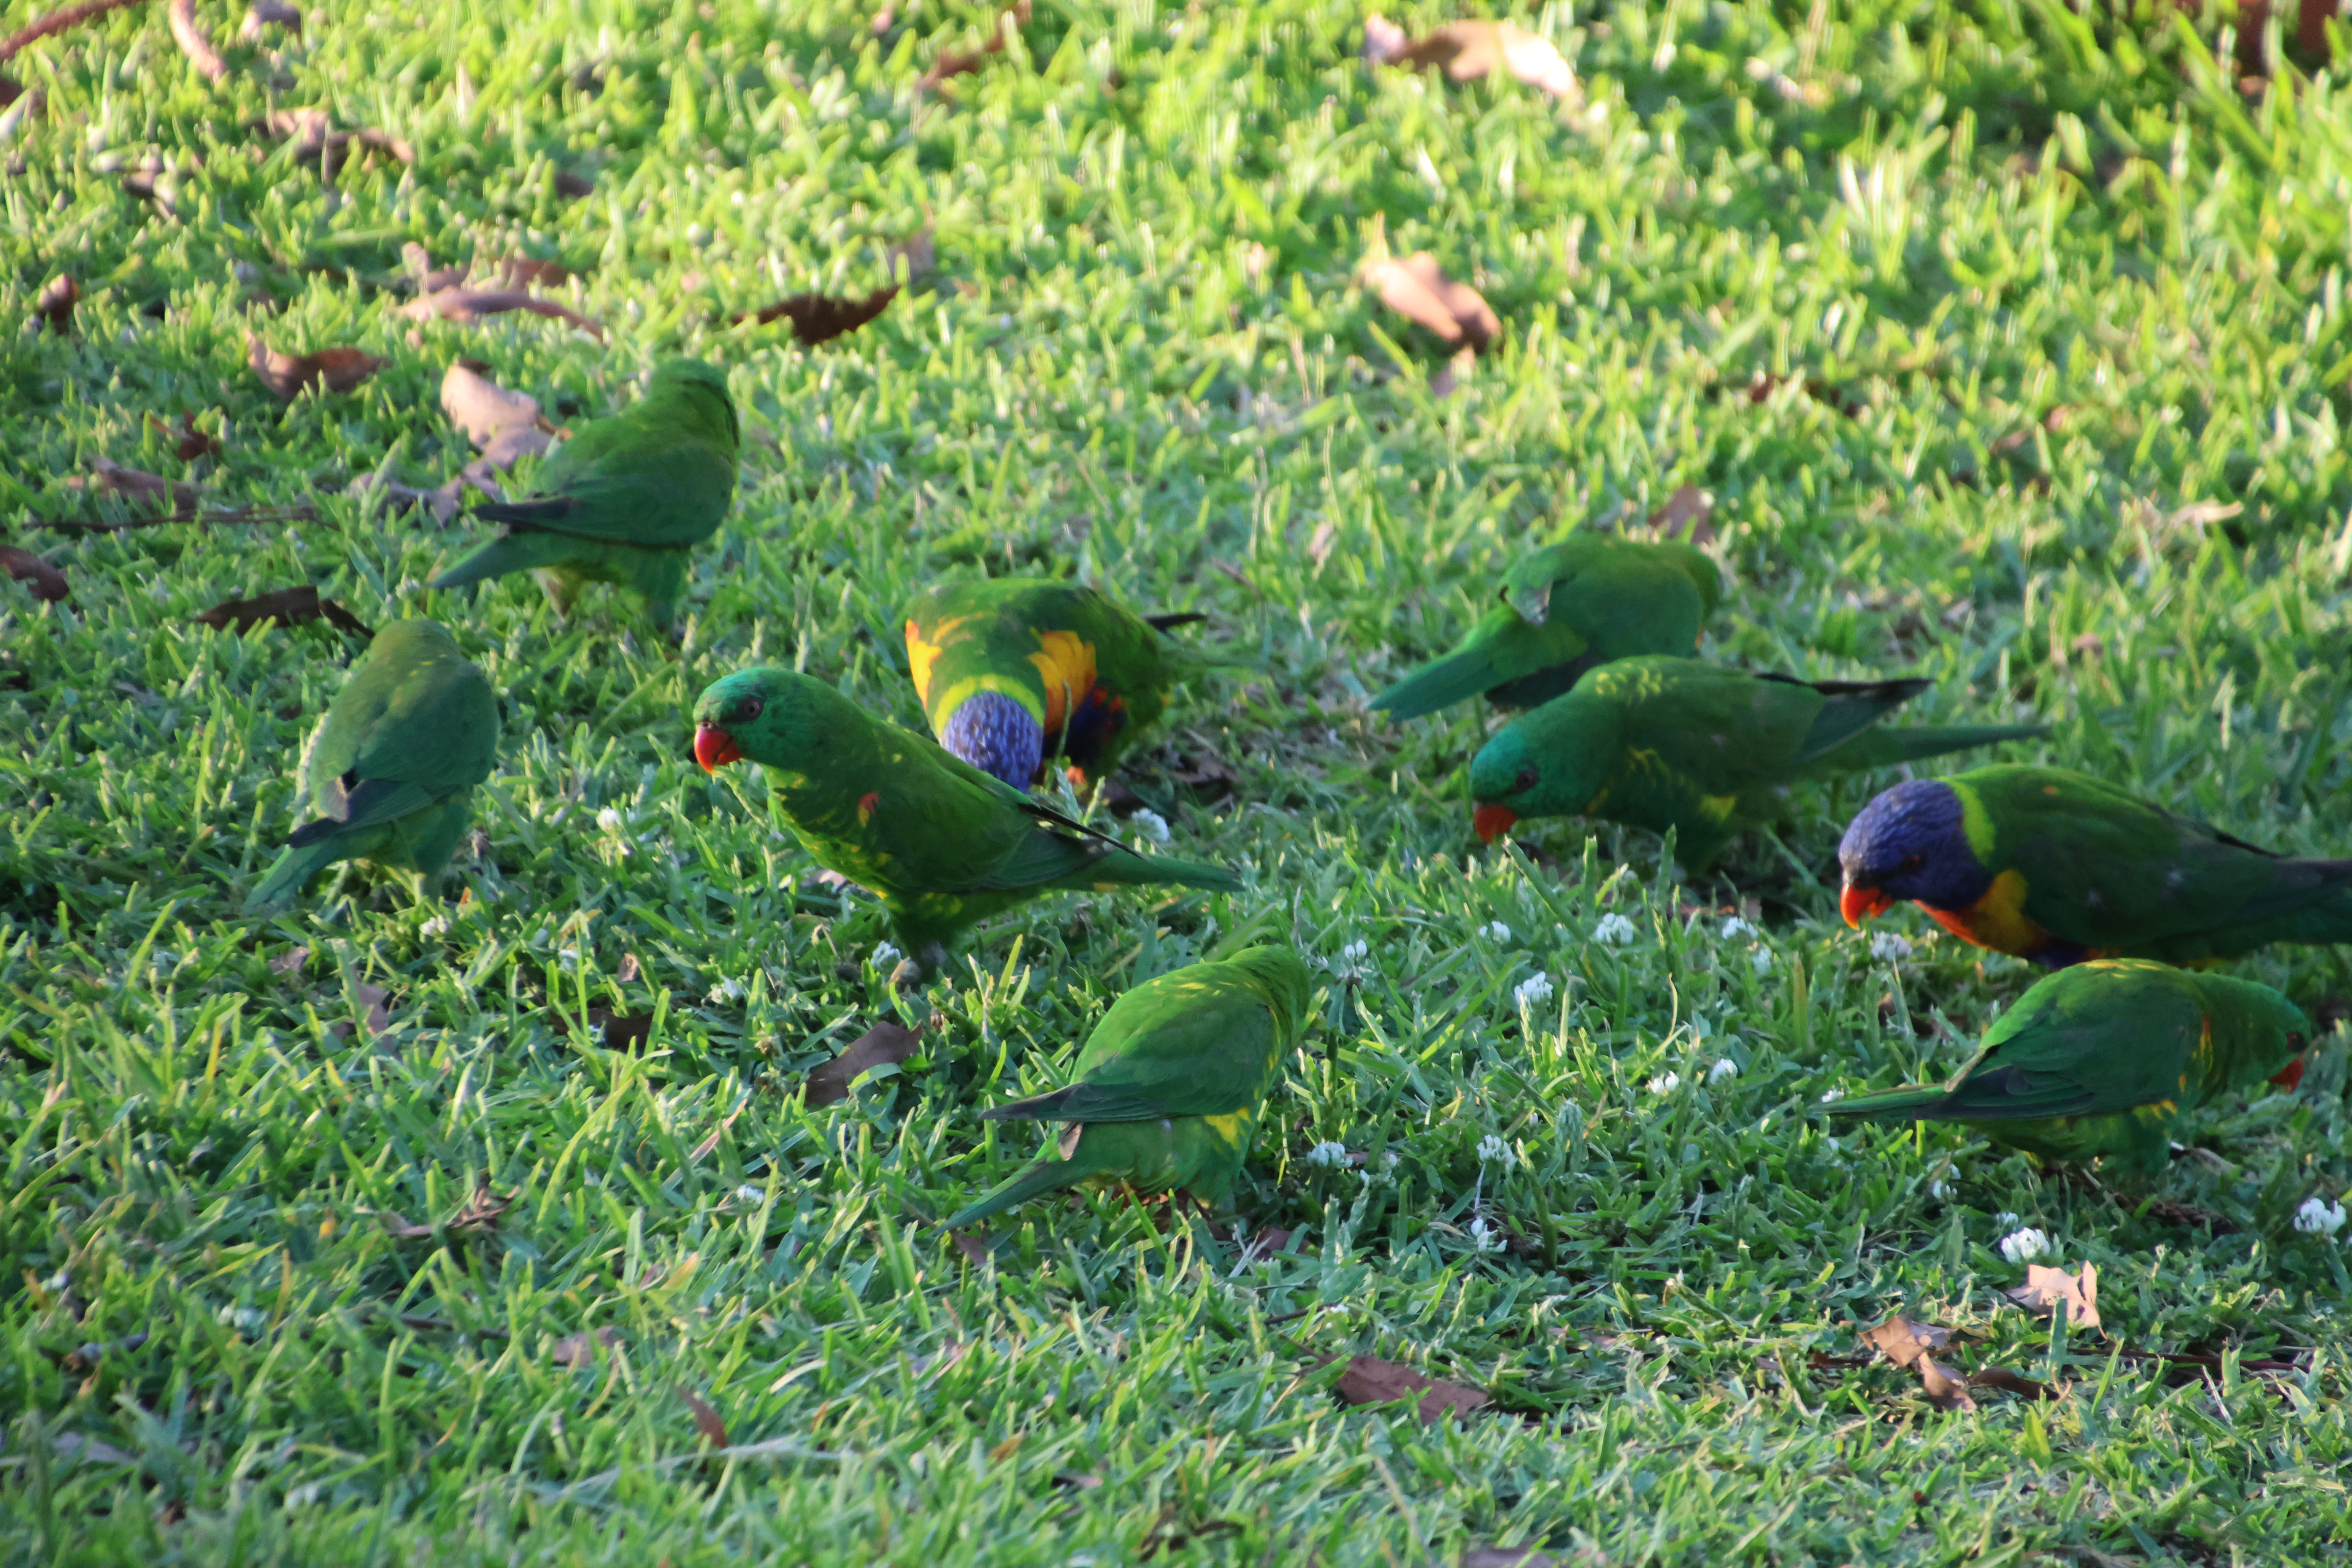 Scaly-breasted lorikeets and rainbow lorikeets on Cove Boulevard